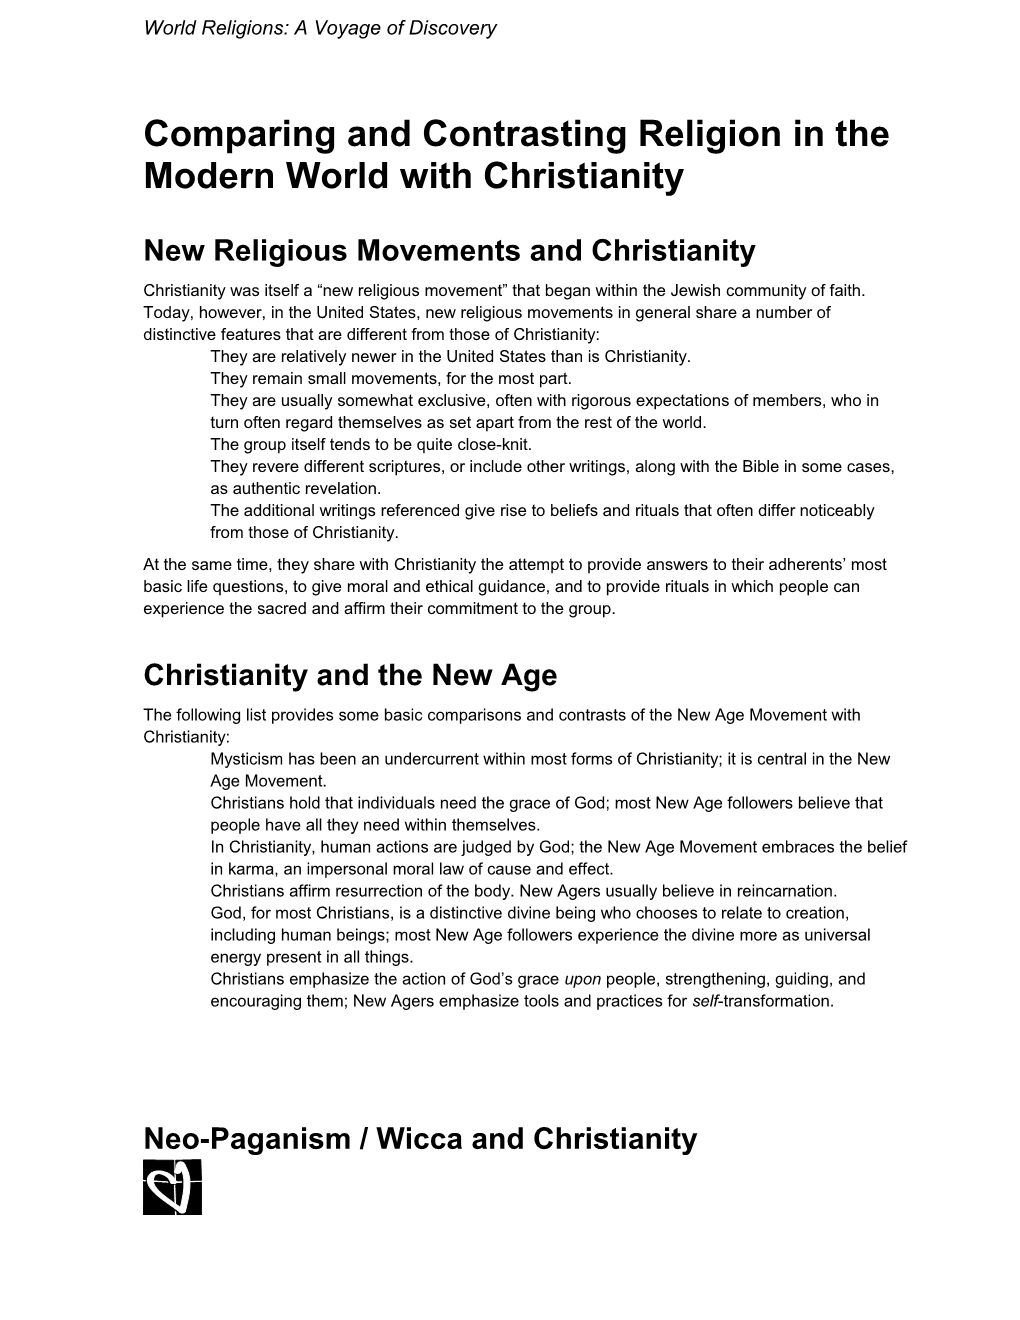 Comparing and Contrasting Religion in the Modern World with Christianity